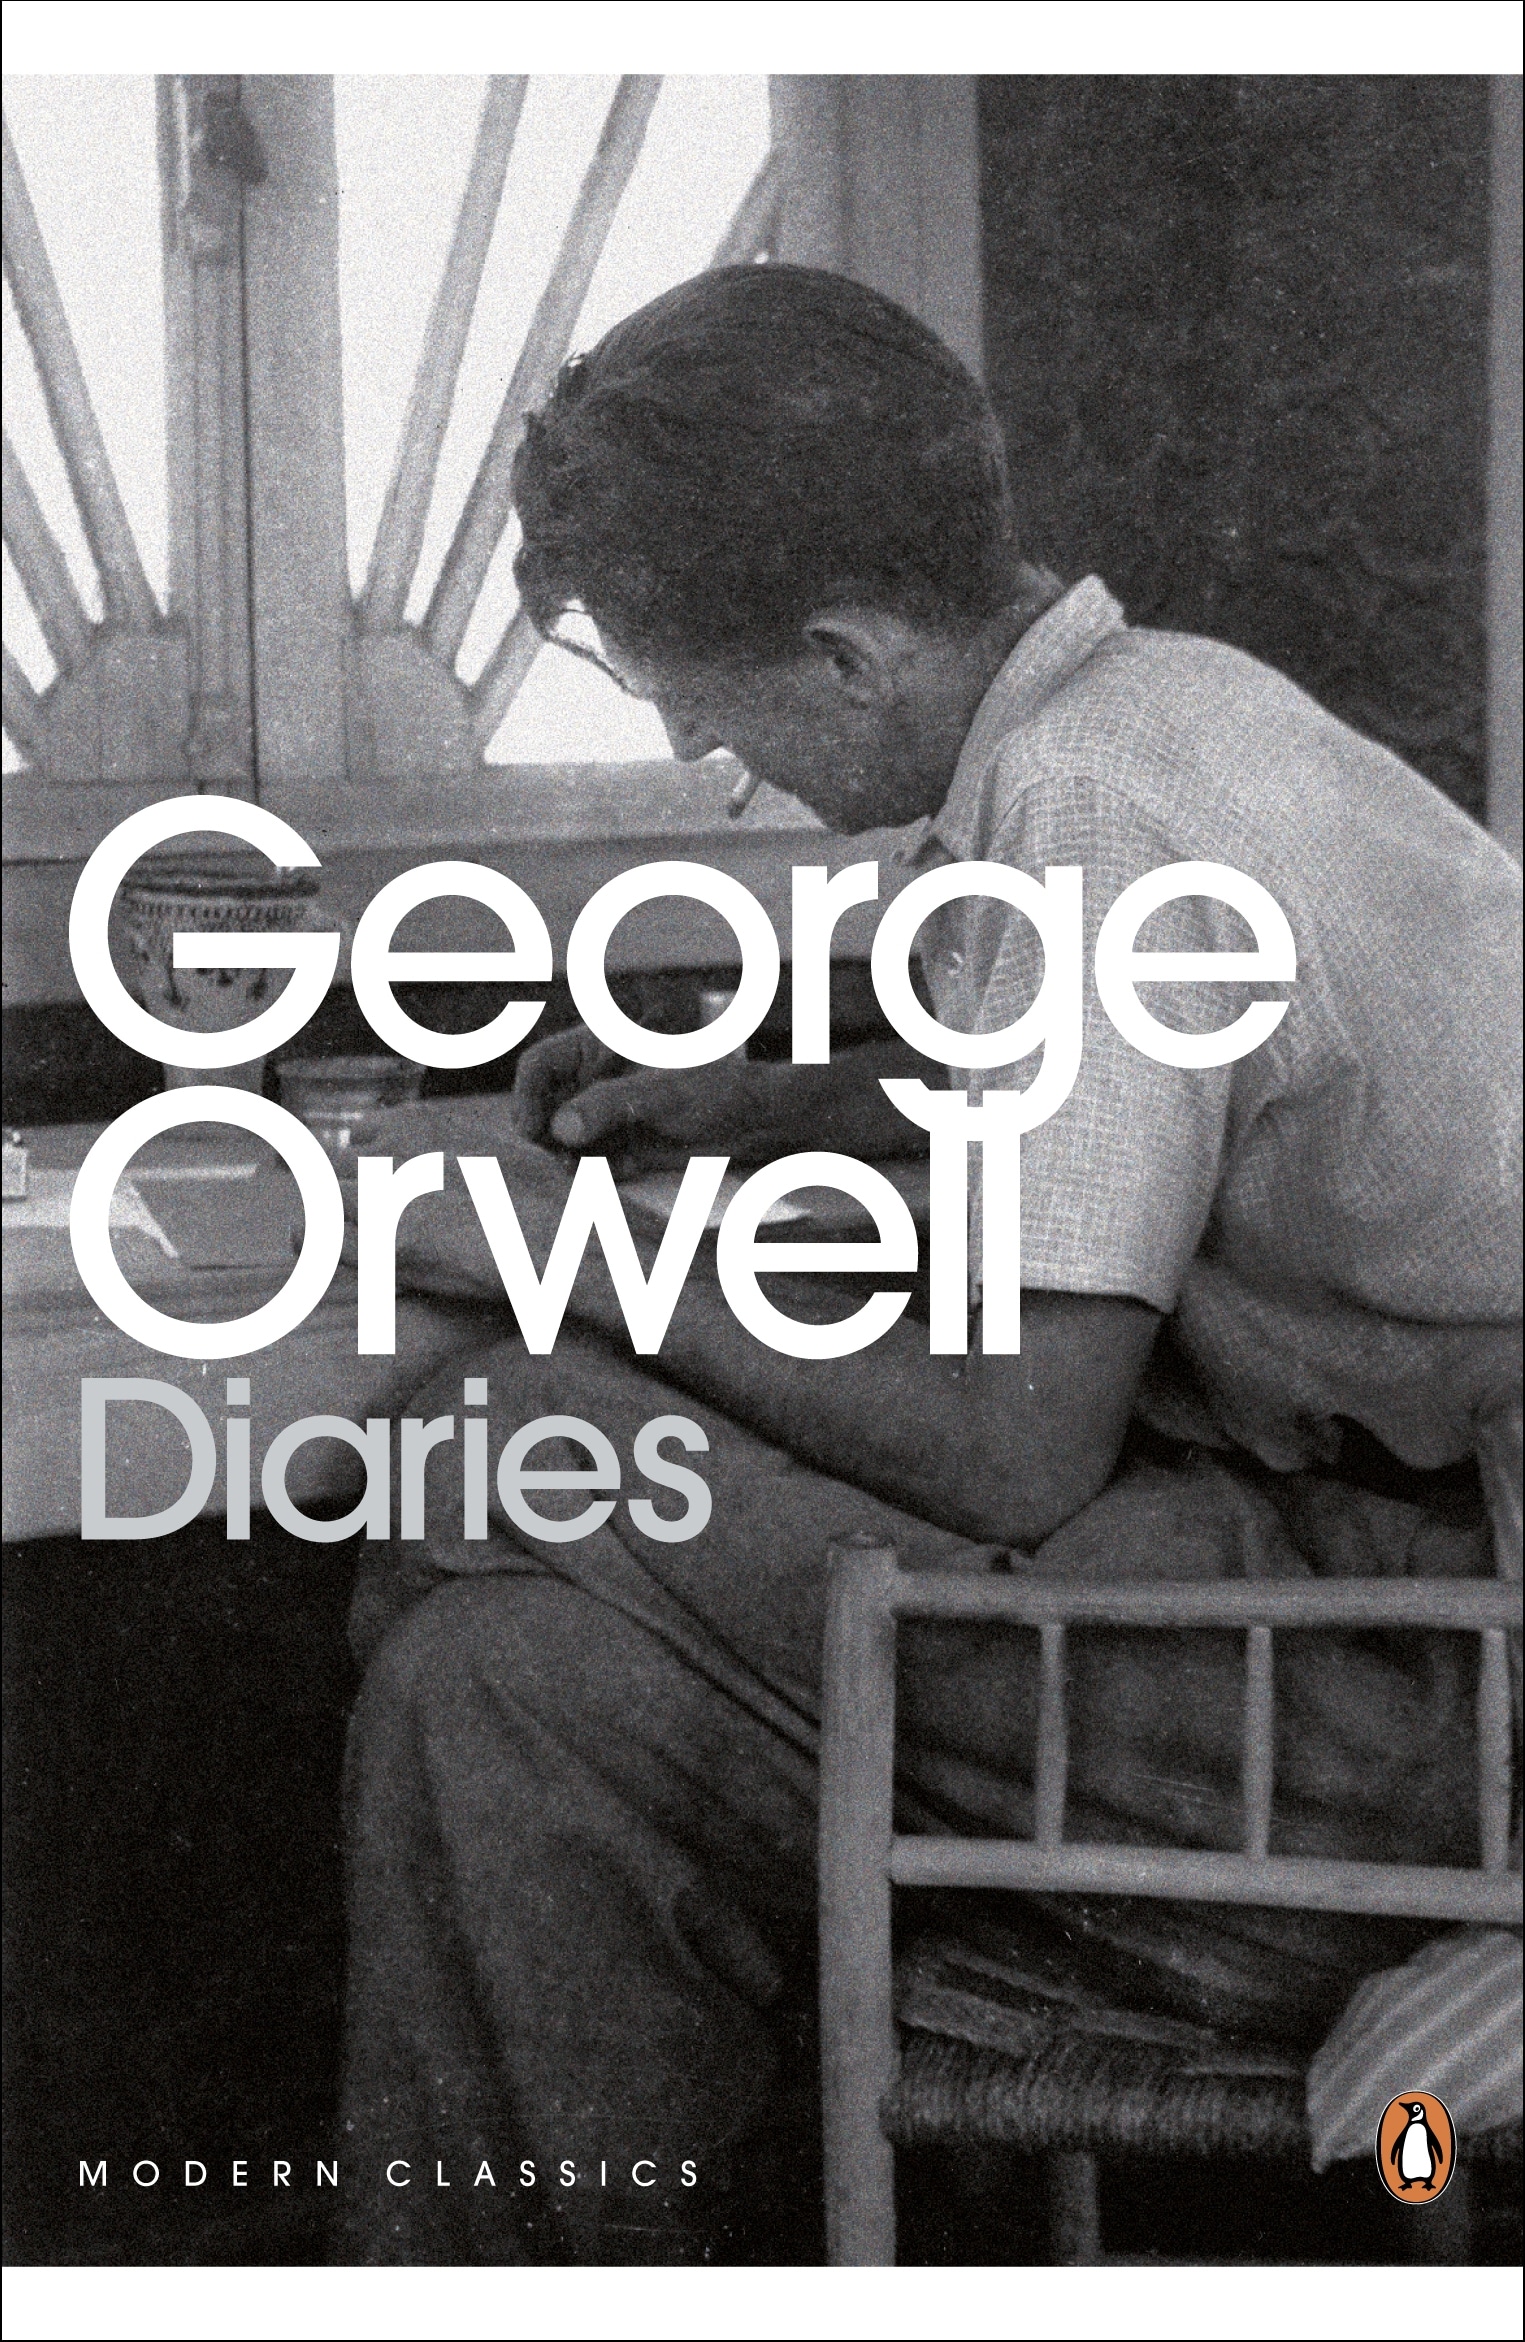 Book “The Orwell Diaries” by George Orwell, Peter Davison — June 3, 2010